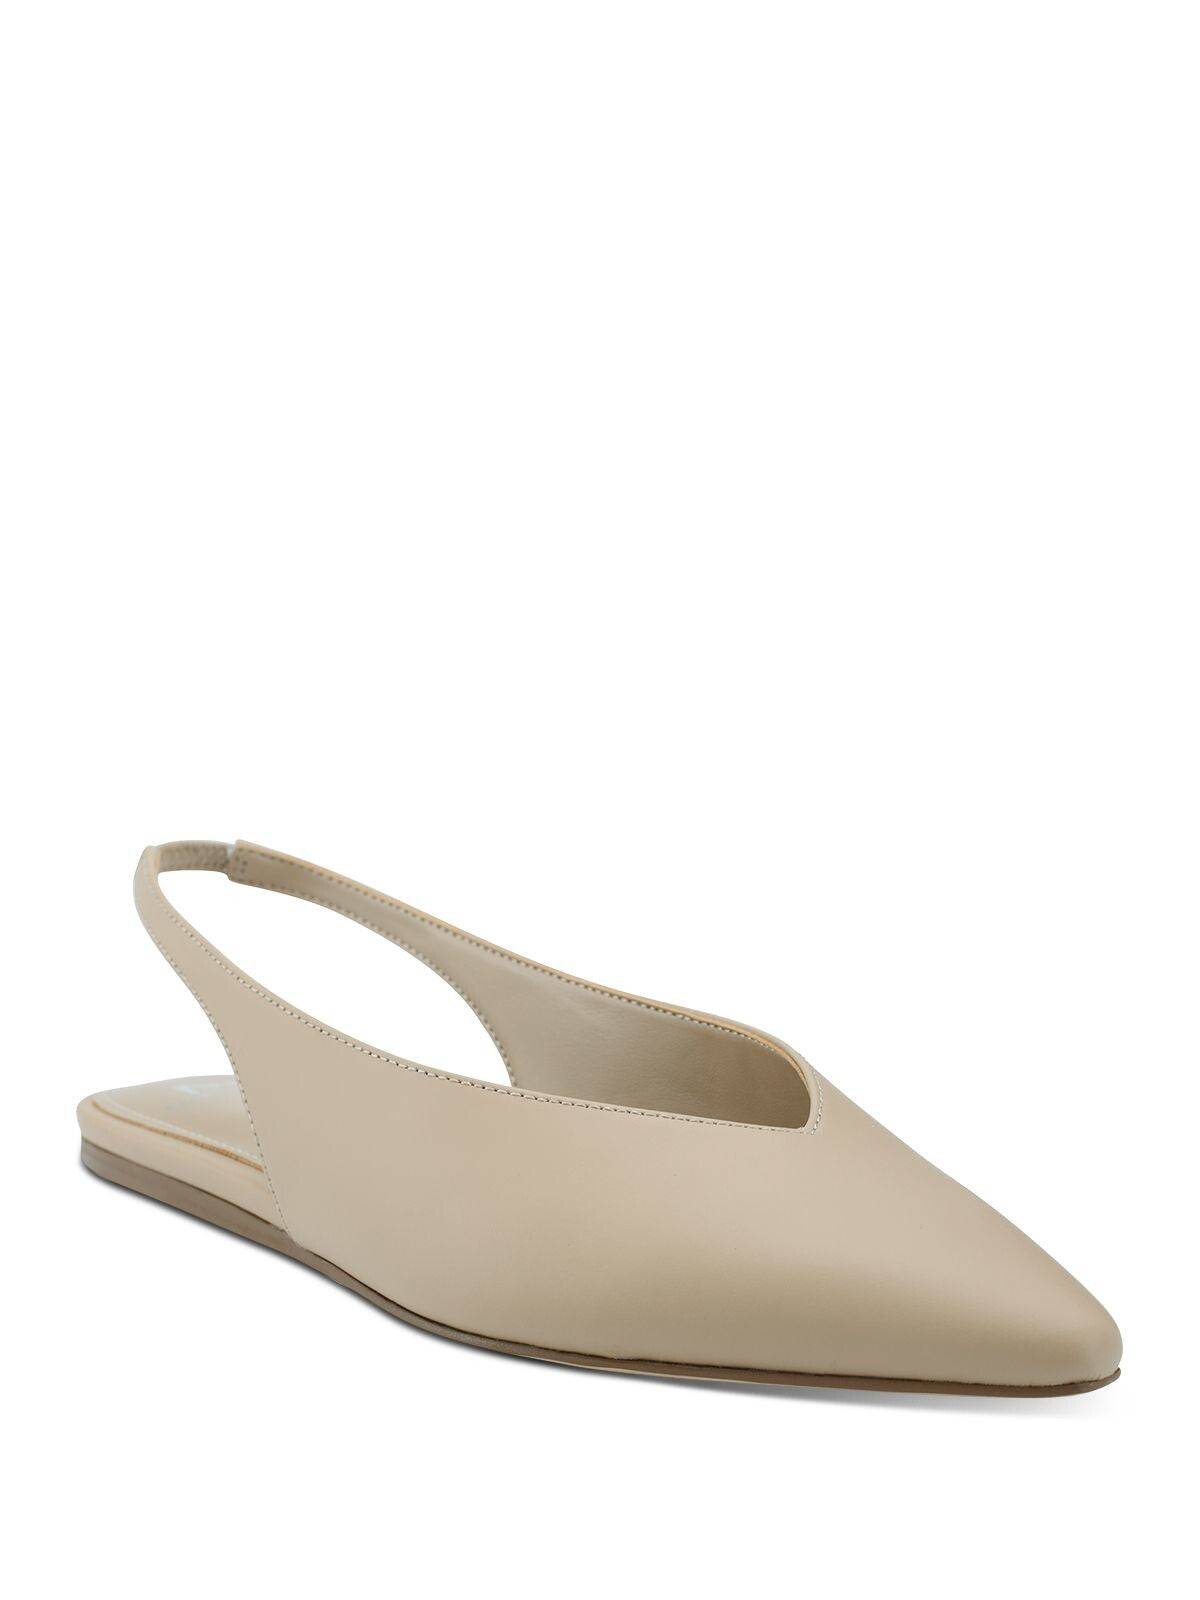 MARC FISHER Womens Beige Slingback Padded Graceful Pointed Toe Slip On Leather Flats Shoes 9 M